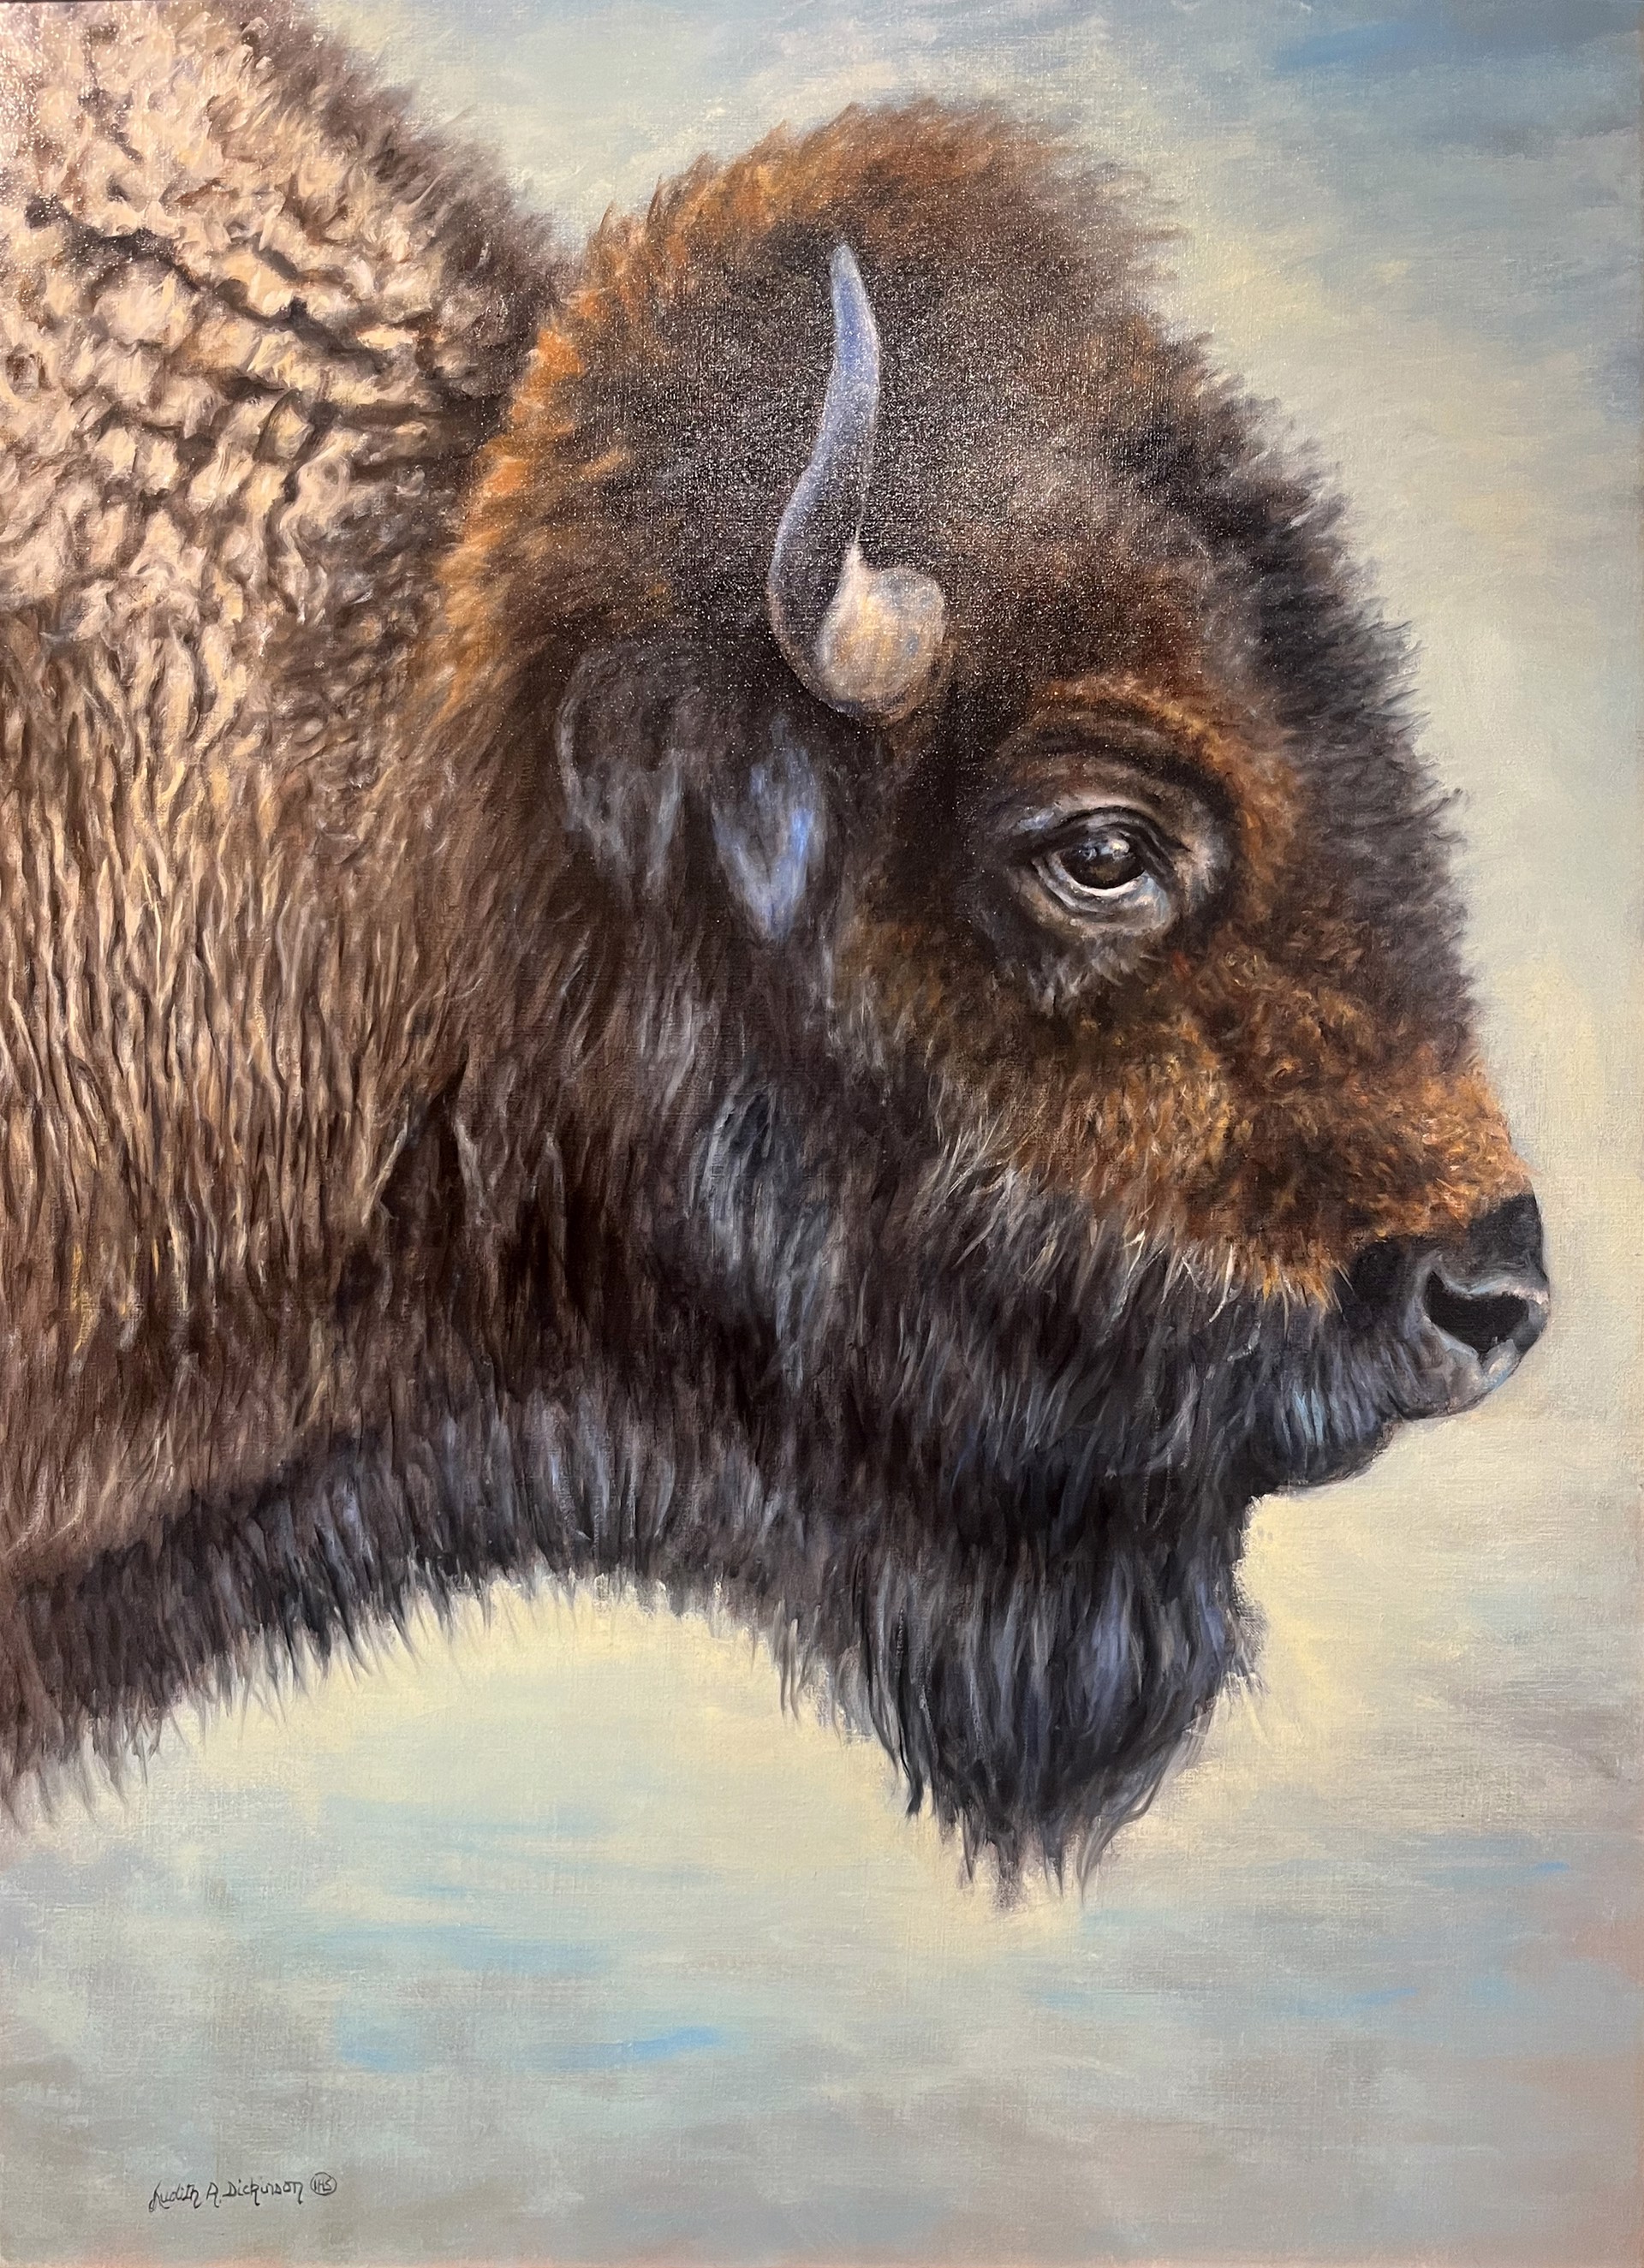 The Bison by Judith Dickinson